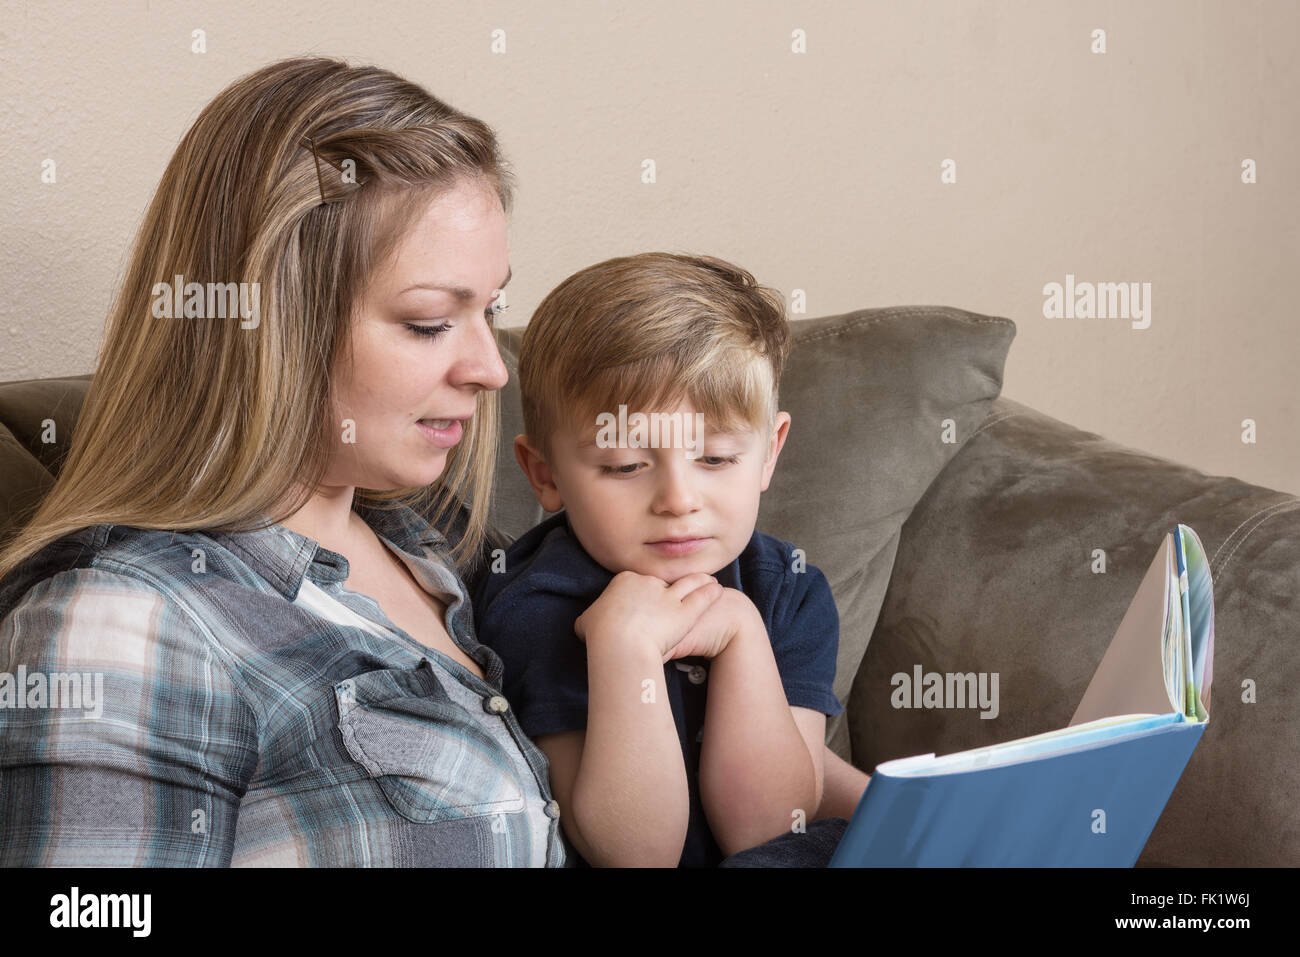 https://c8.alamy.com/comp/FK1W6J/a-young-boy-listens-attentively-as-his-mother-reads-to-him-FK1W6J.jpg